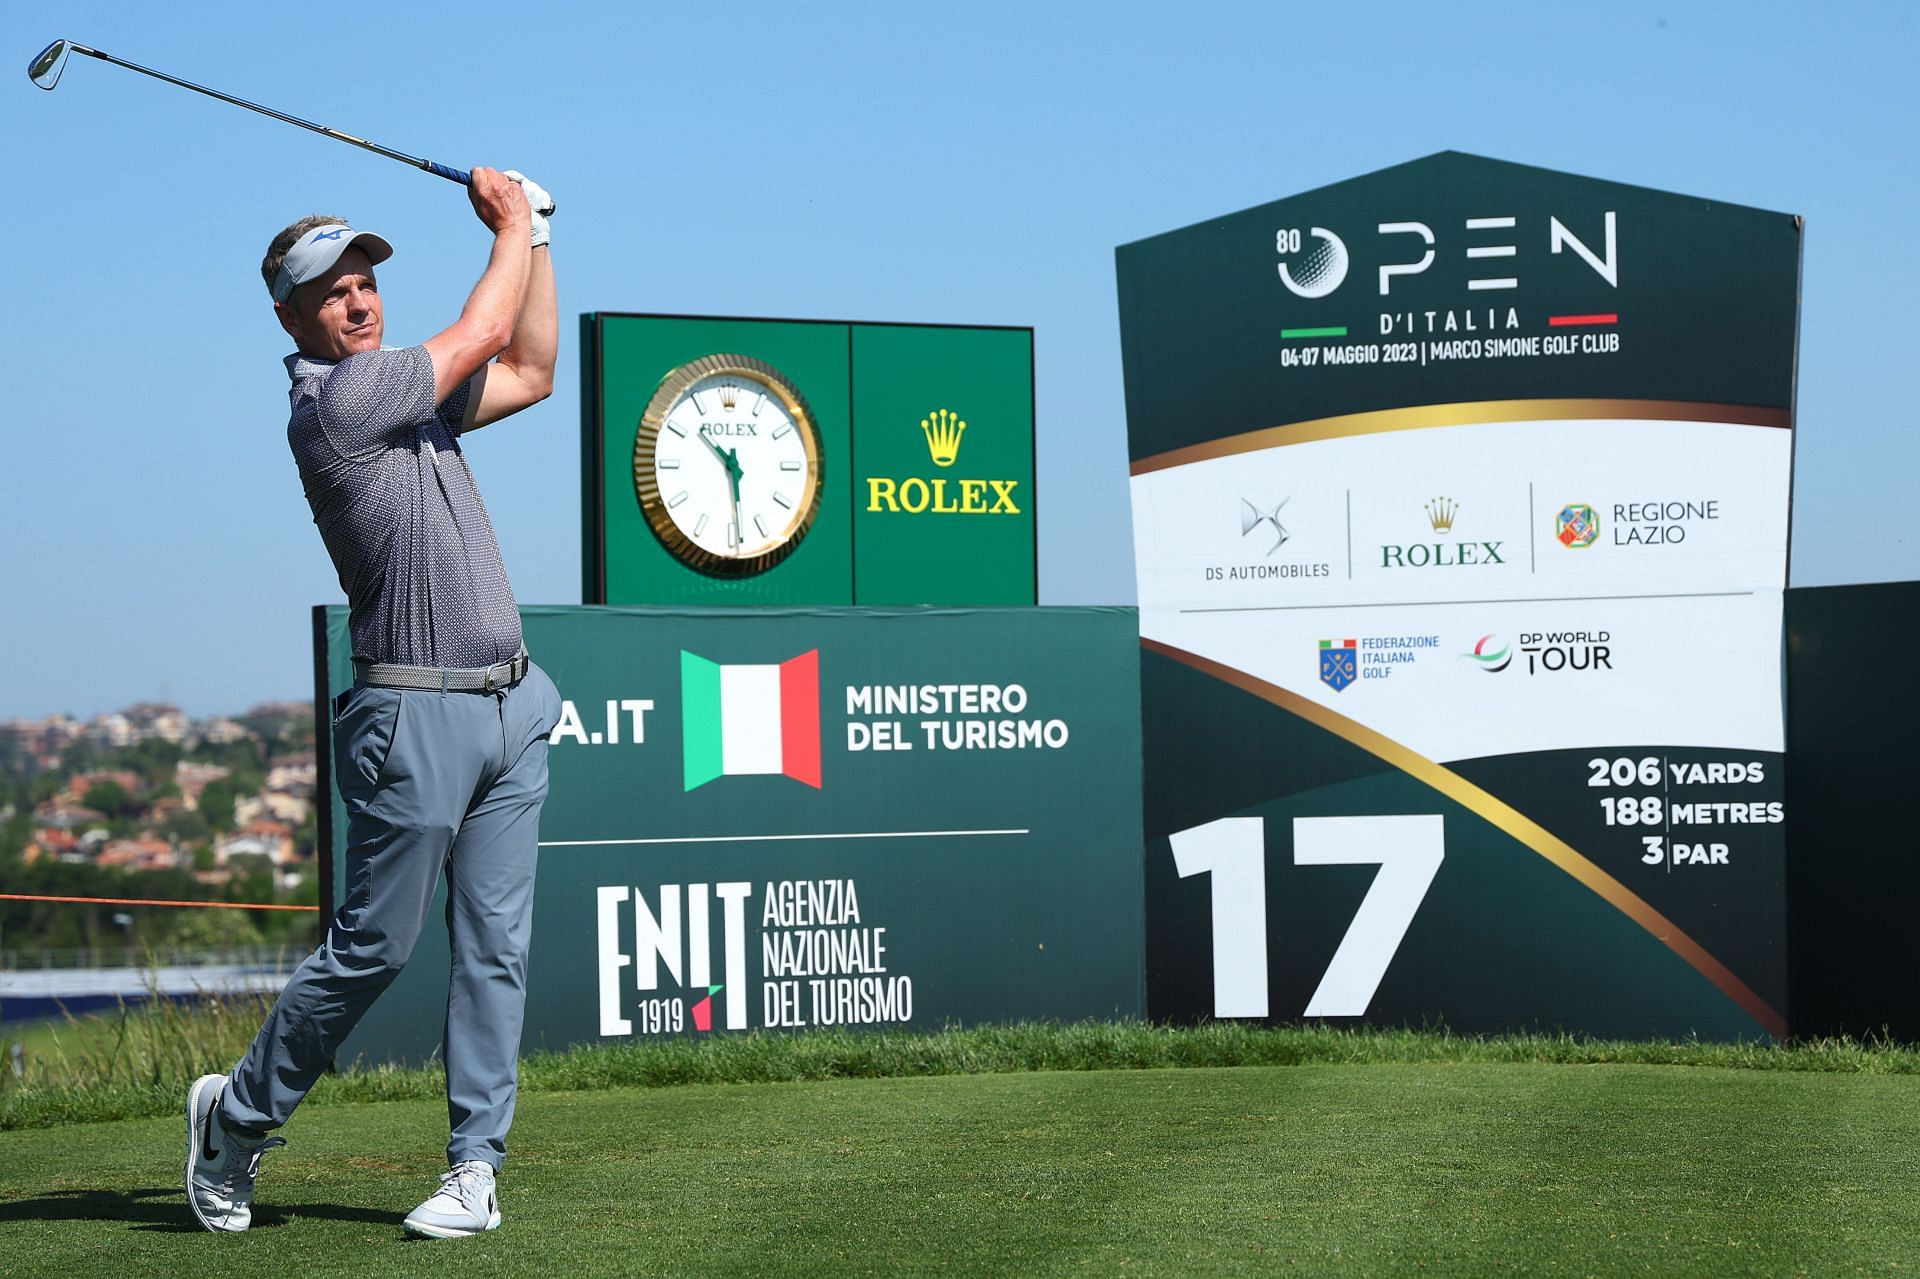 Redesigned Marco Simone makes tournament debut with Italian Open